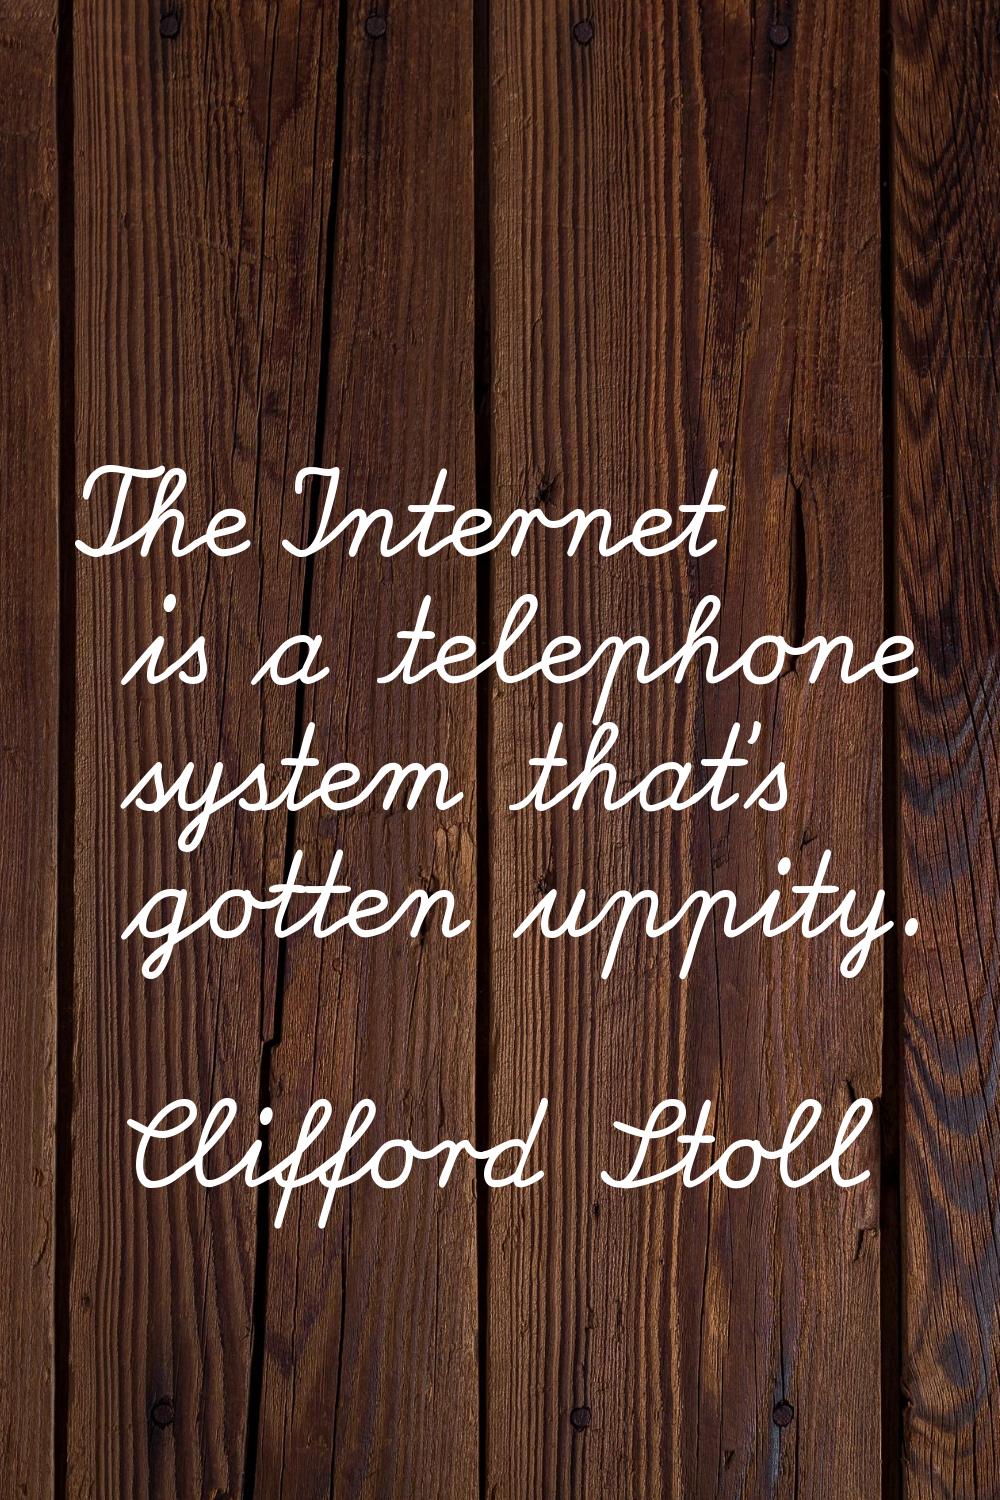 The Internet is a telephone system that's gotten uppity.